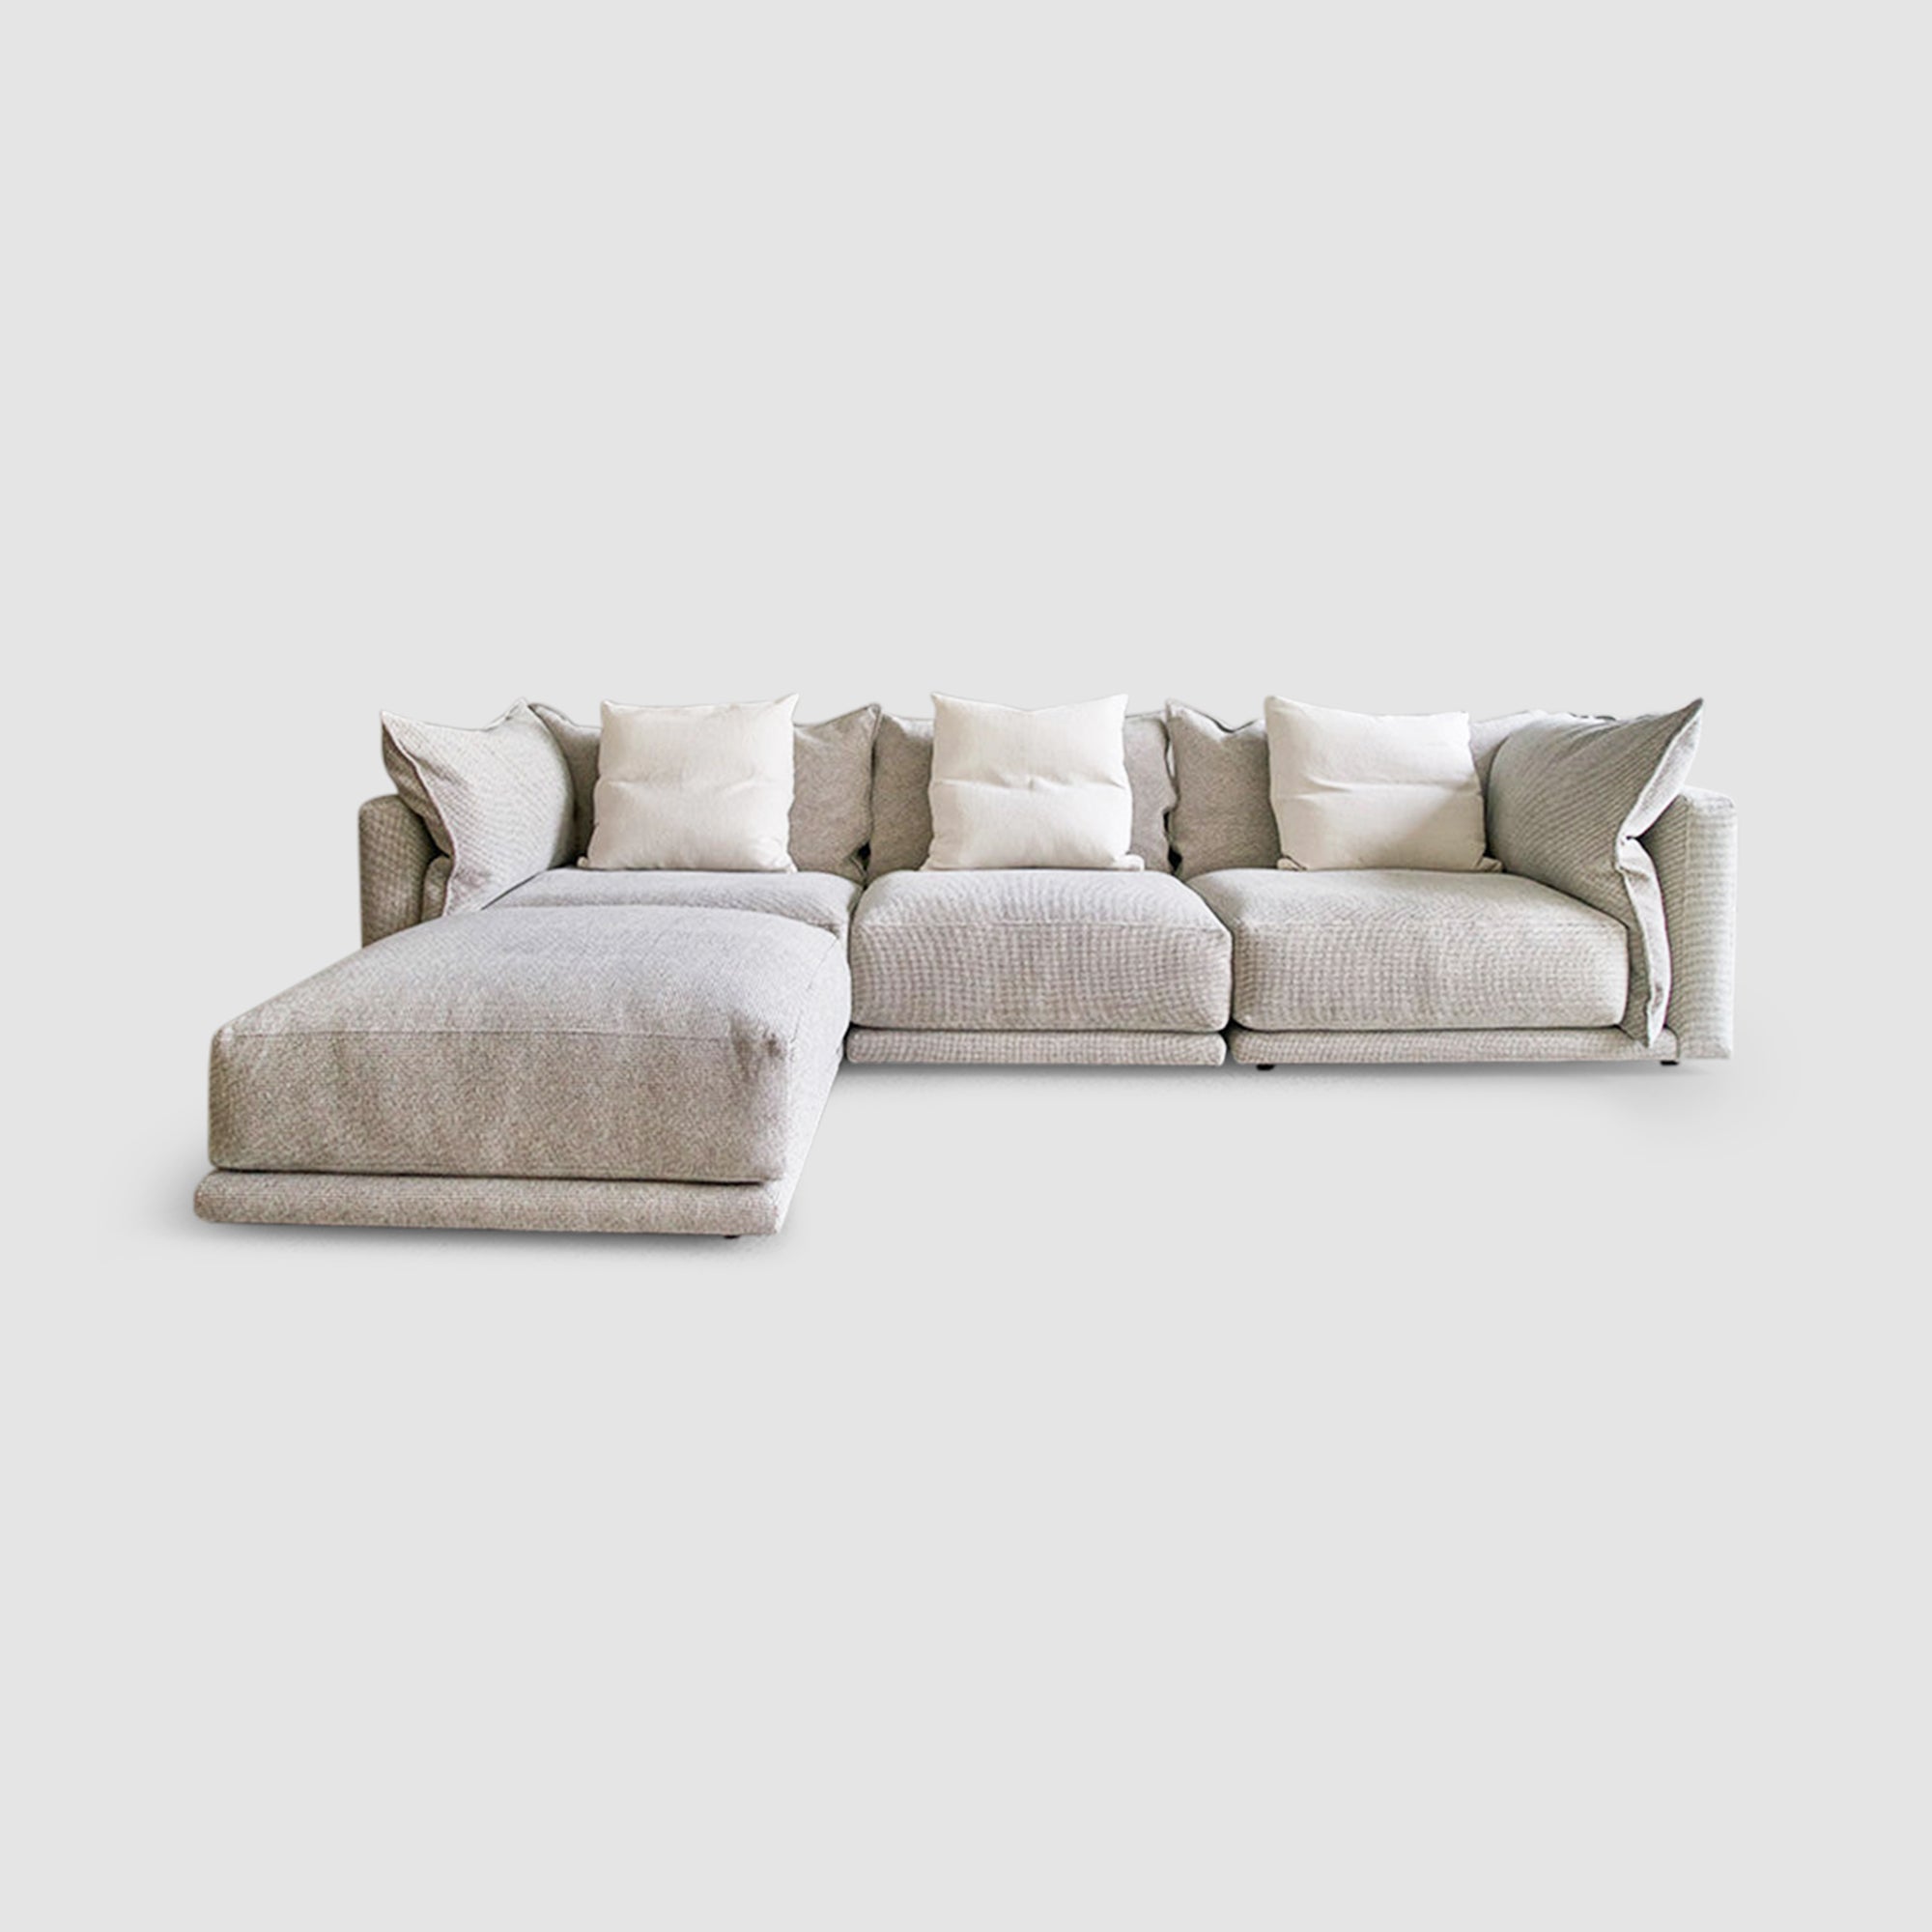 Modern grey sectional sofa with white cushions in a contemporary living room setting, ideal for stylish and comfortable home decor.